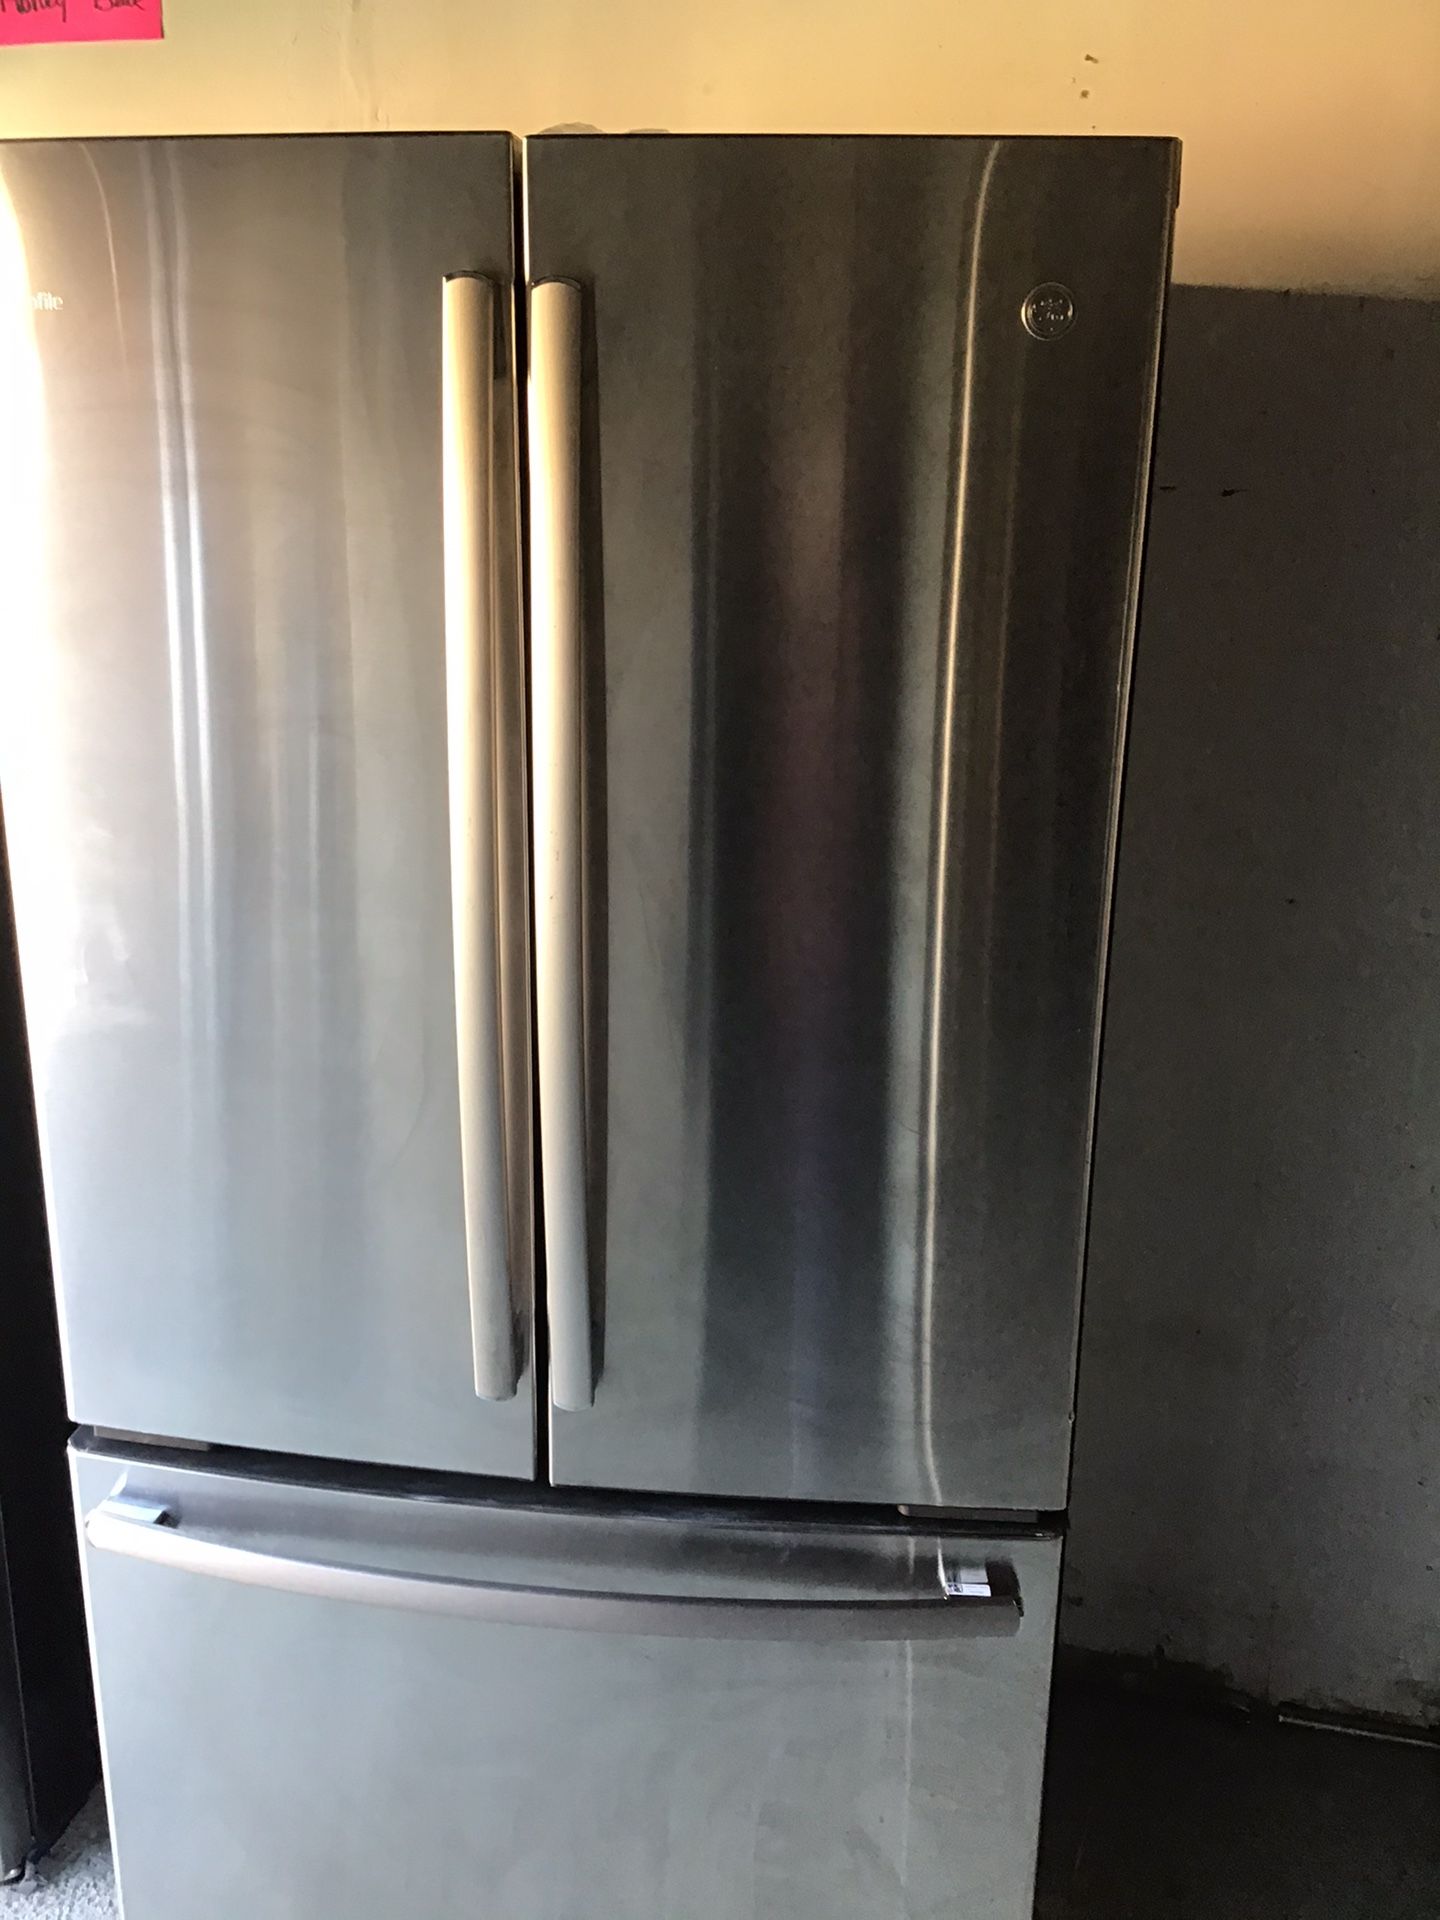 GE French Door Refrigerator w/ water and ice maker inside